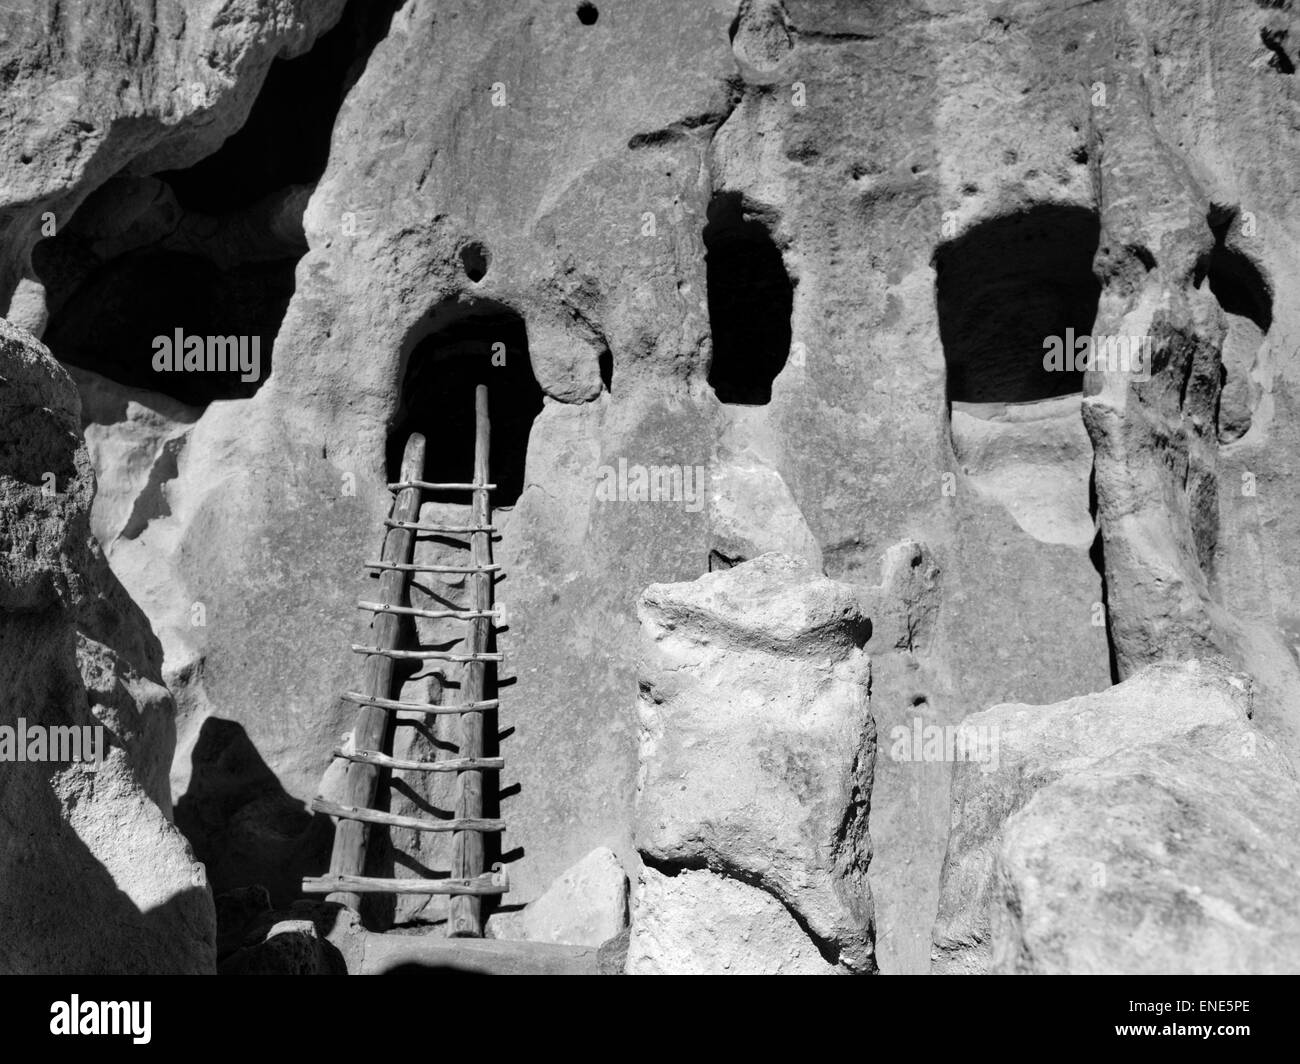 Cliff Dwellings at the Bandelier National Monument, Los Alamos, New Mexico. Stock Photo